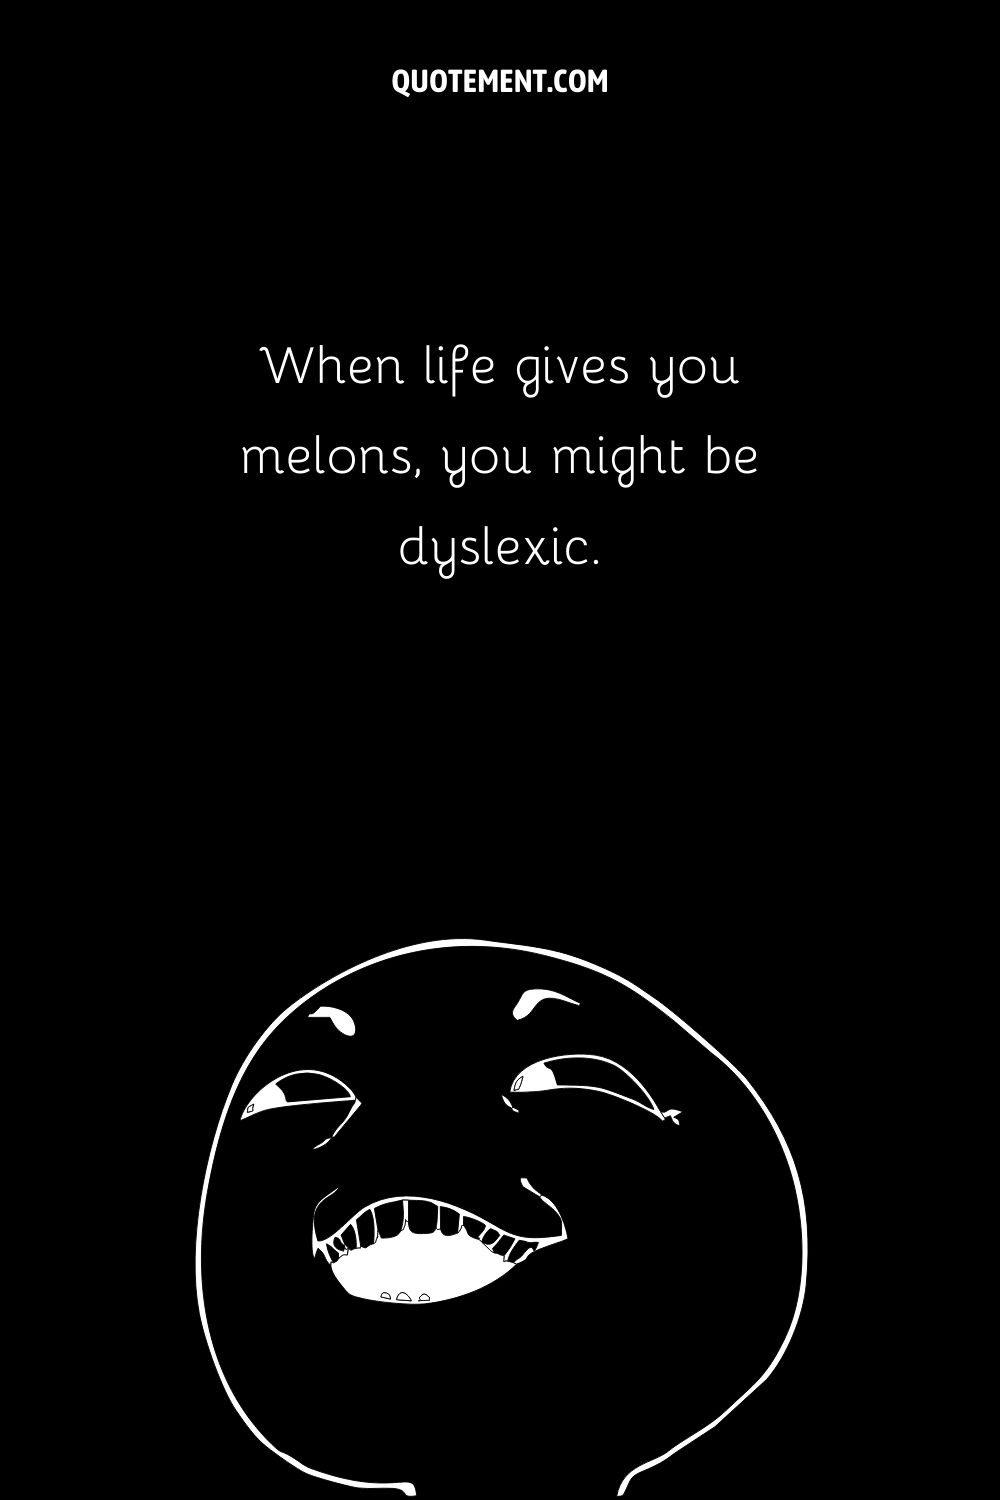 When life gives you melons, you might be dyslexic.